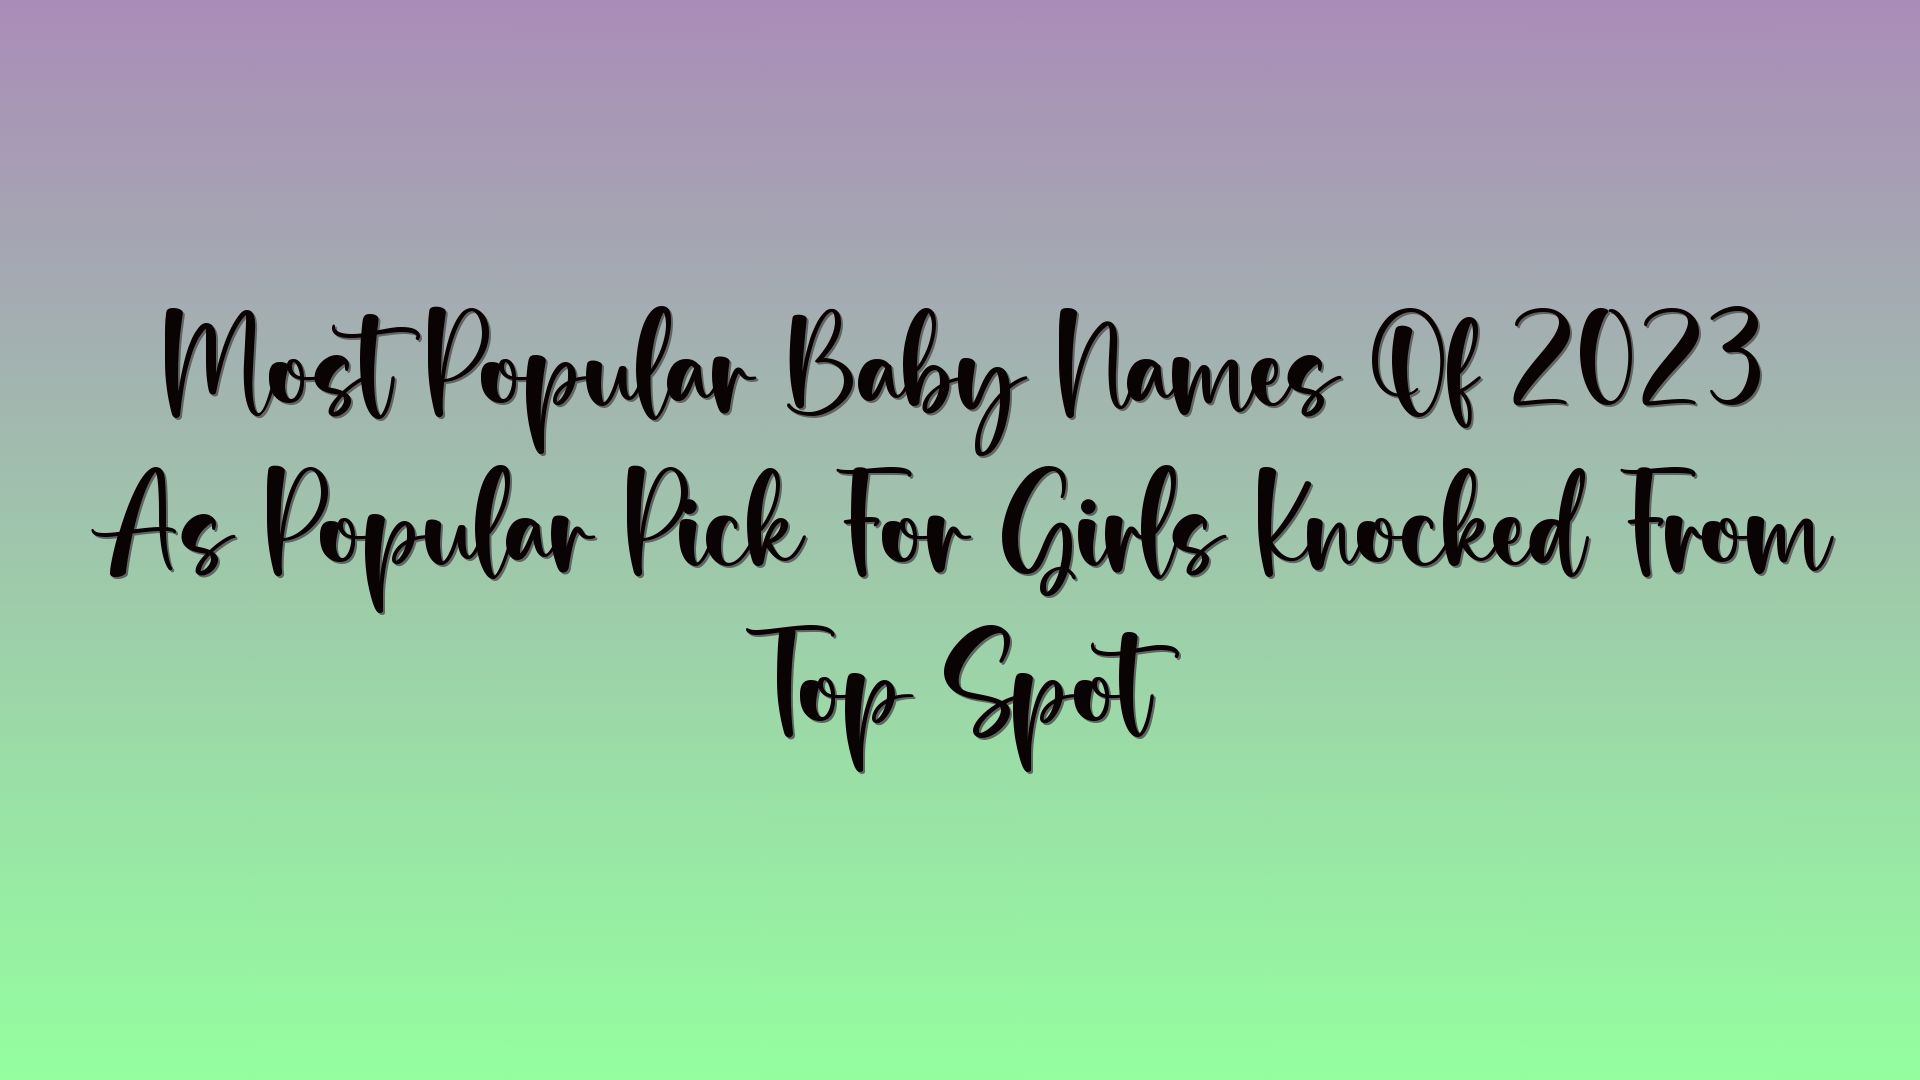 Most Popular Baby Names Of 2023 As Popular Pick For Girls Knocked From Top Spot